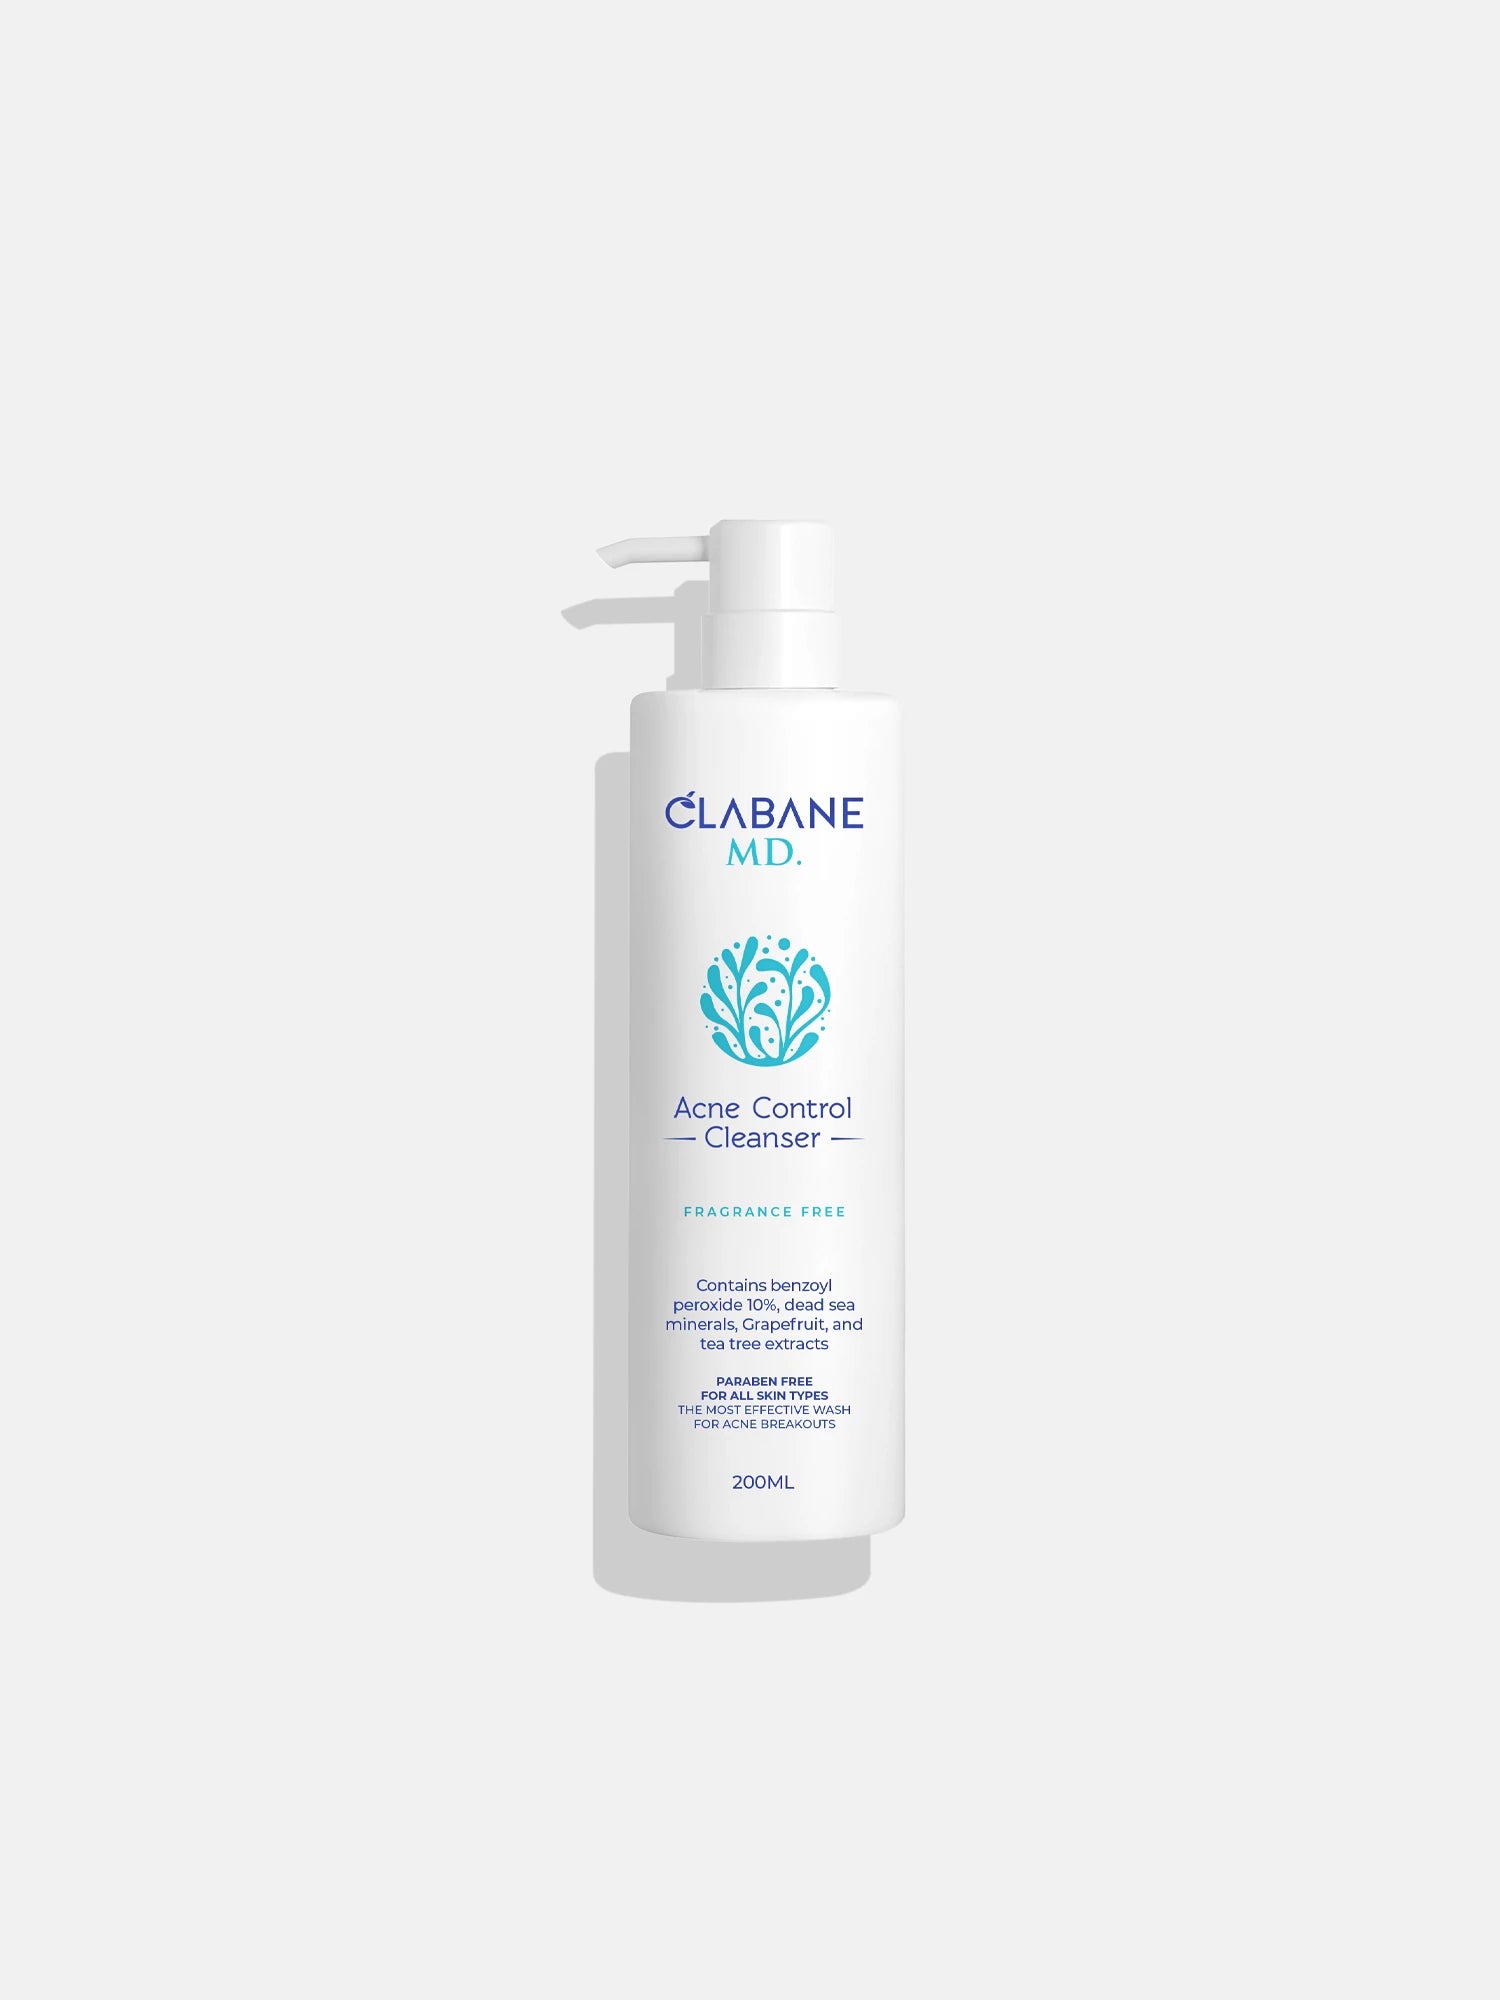 Clabane MD Acne Control Cleanser